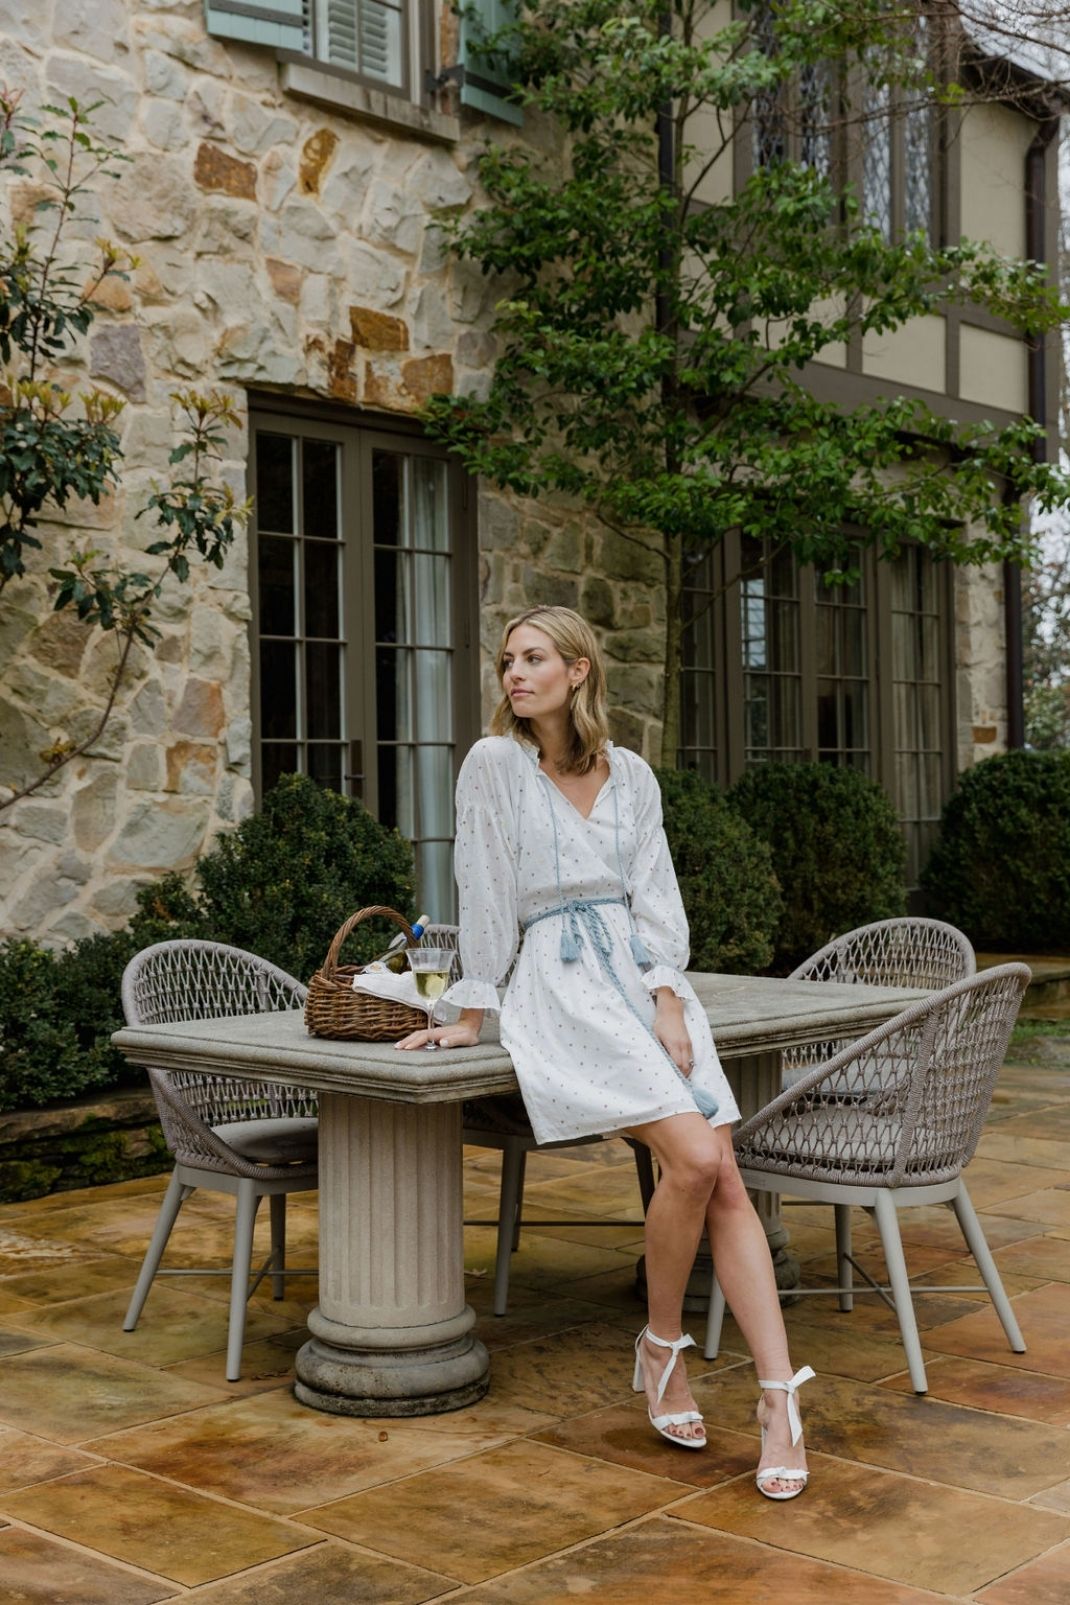 Lifestyle image of a woman sitting outside on a table wearing the Isla Dress